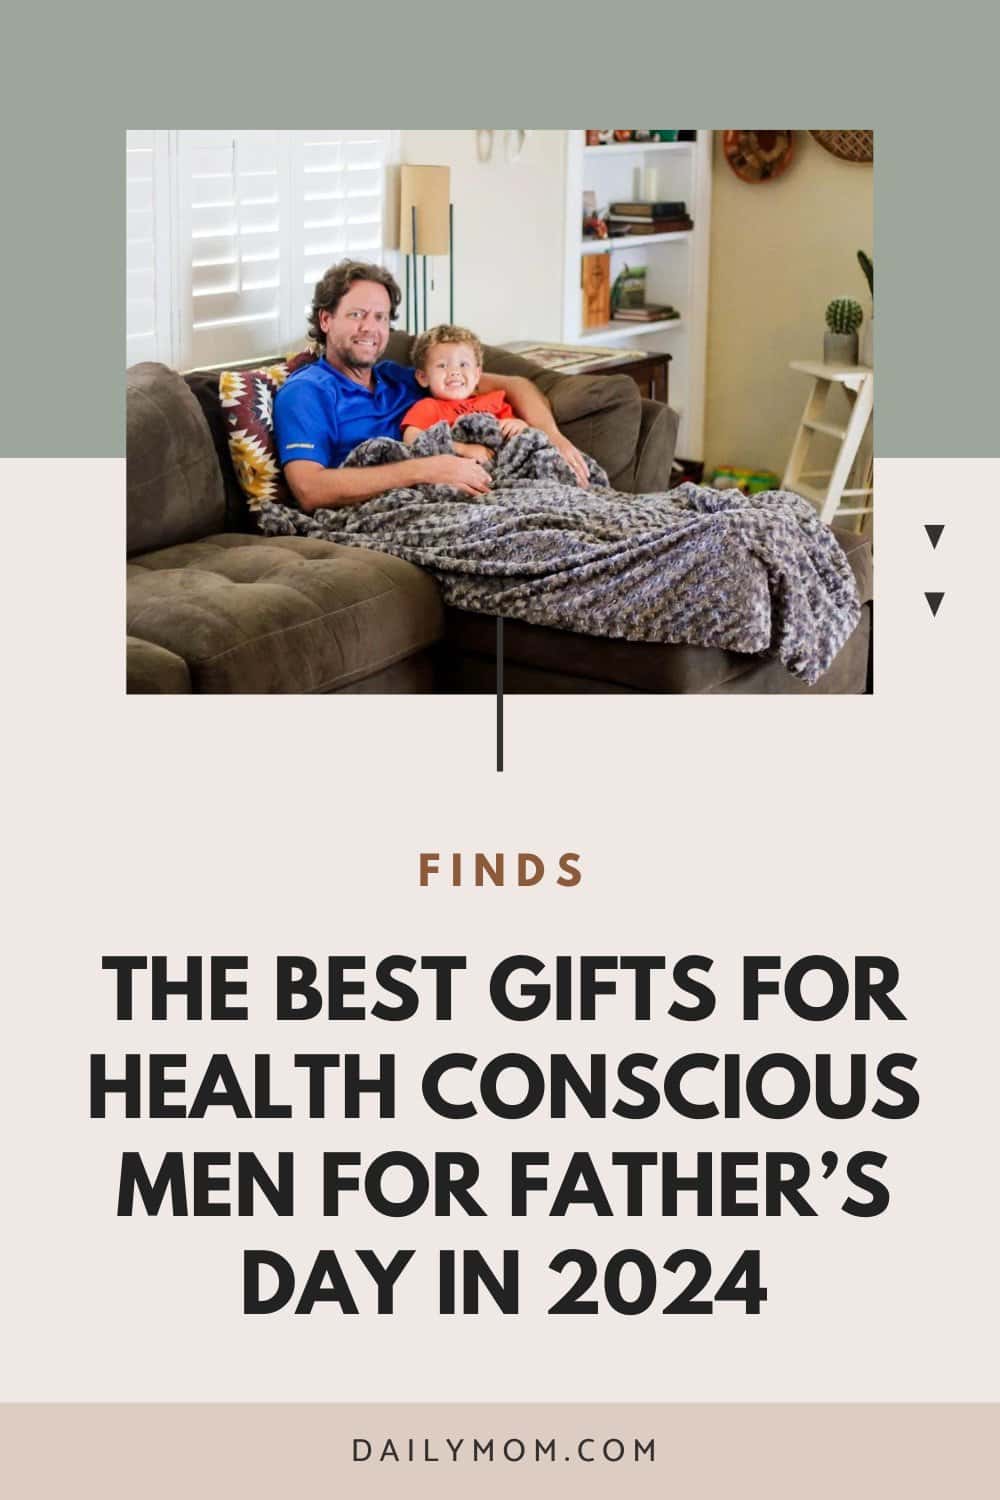 The Best Gifts For Health Conscious Men For Father'S Day In 2024 48 Daily Mom, Magazine For Families